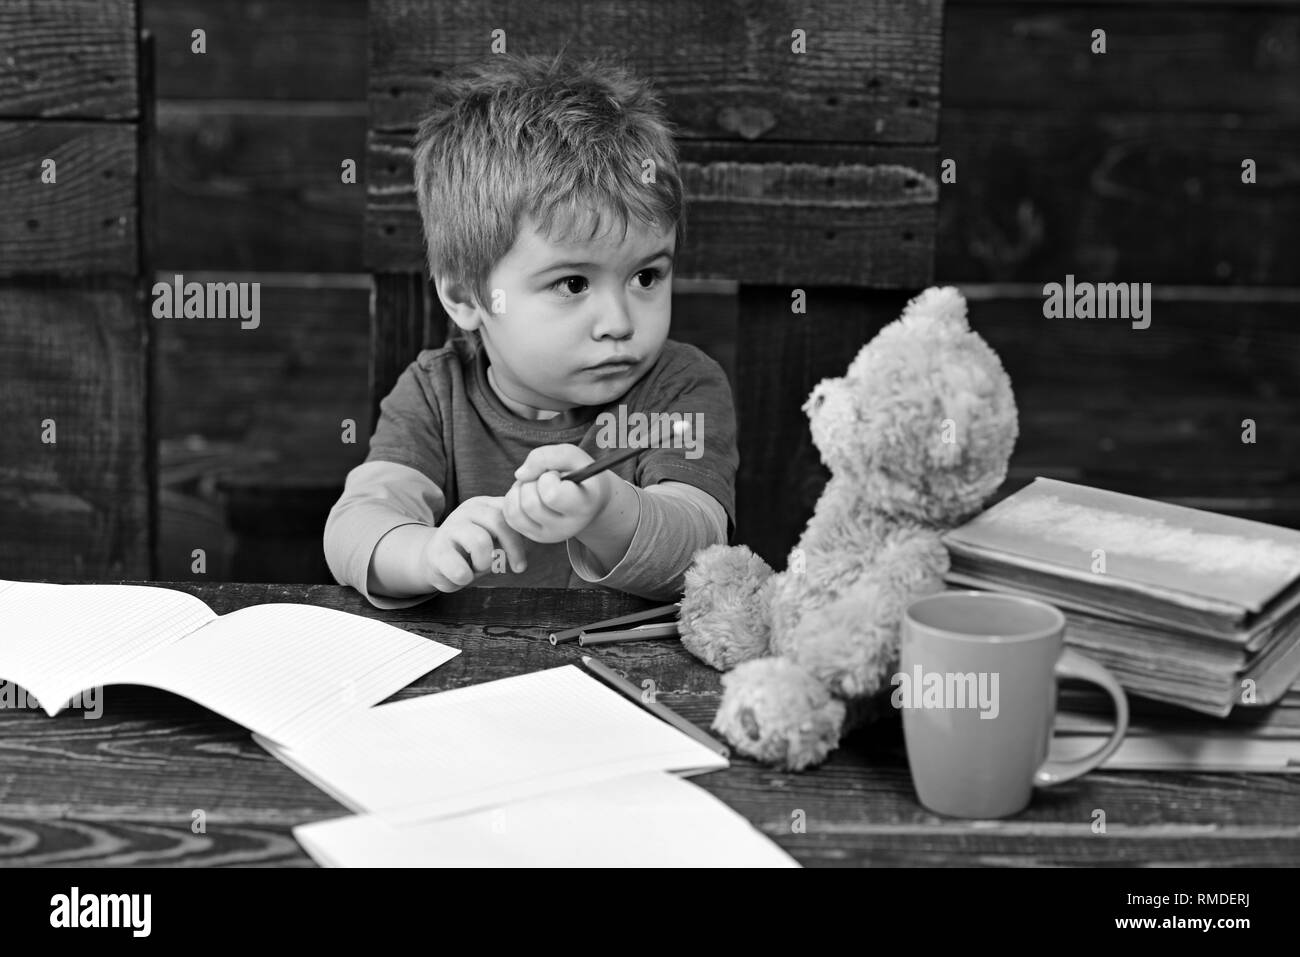 Busy kid at school. Small boy sitting at wooden table with copybooks. Blond child looking at his teddy bear Stock Photo